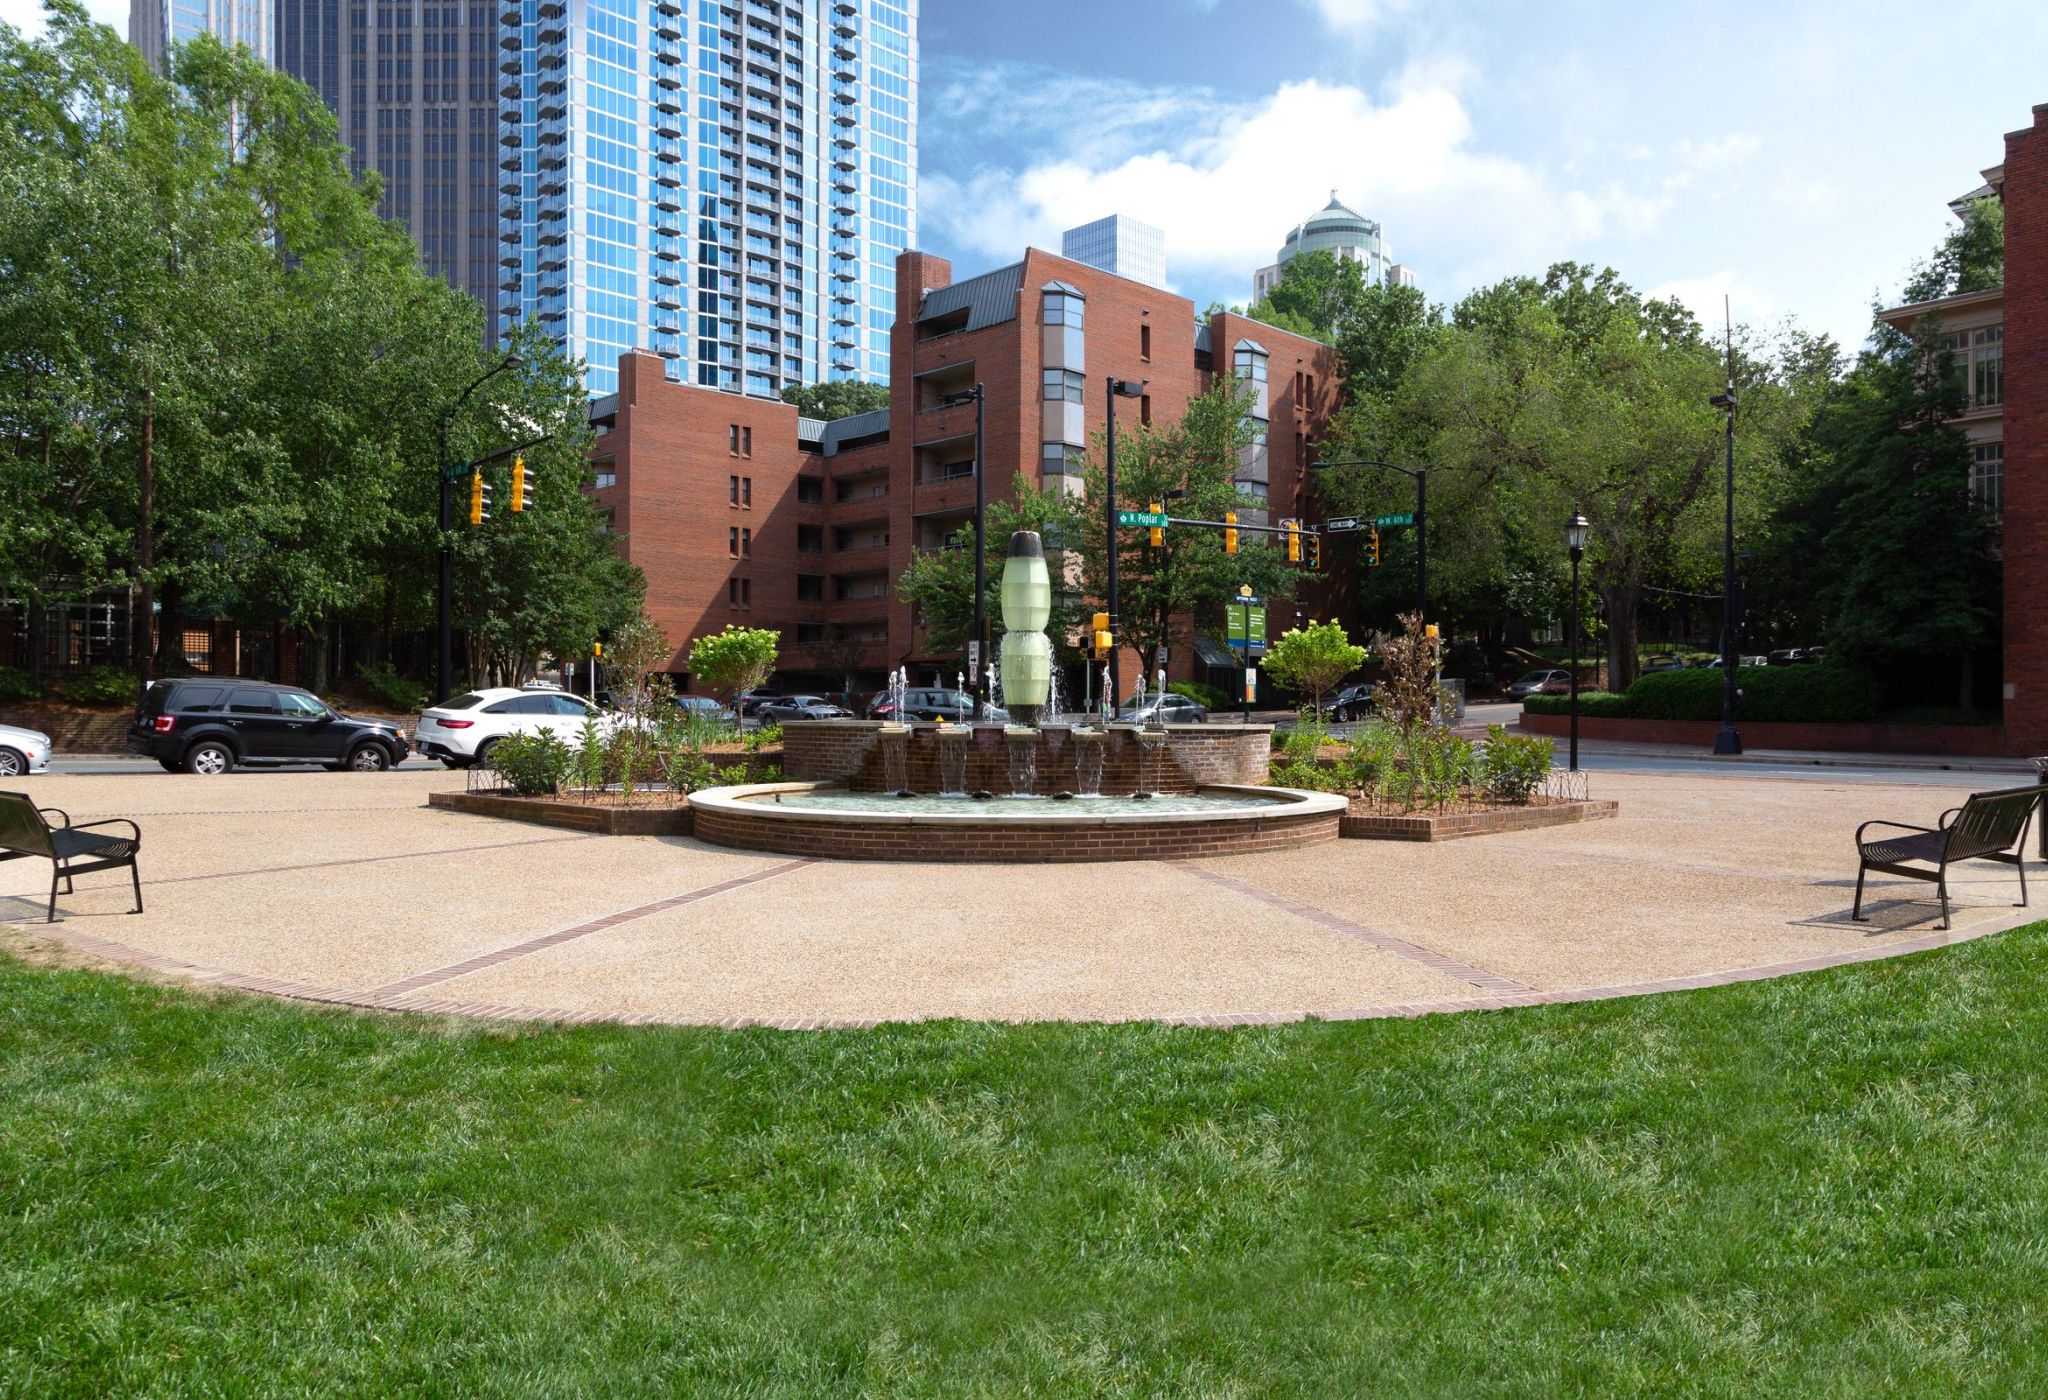 Grassy and green park with fountain near The Vue apartments in Charlotte, NC